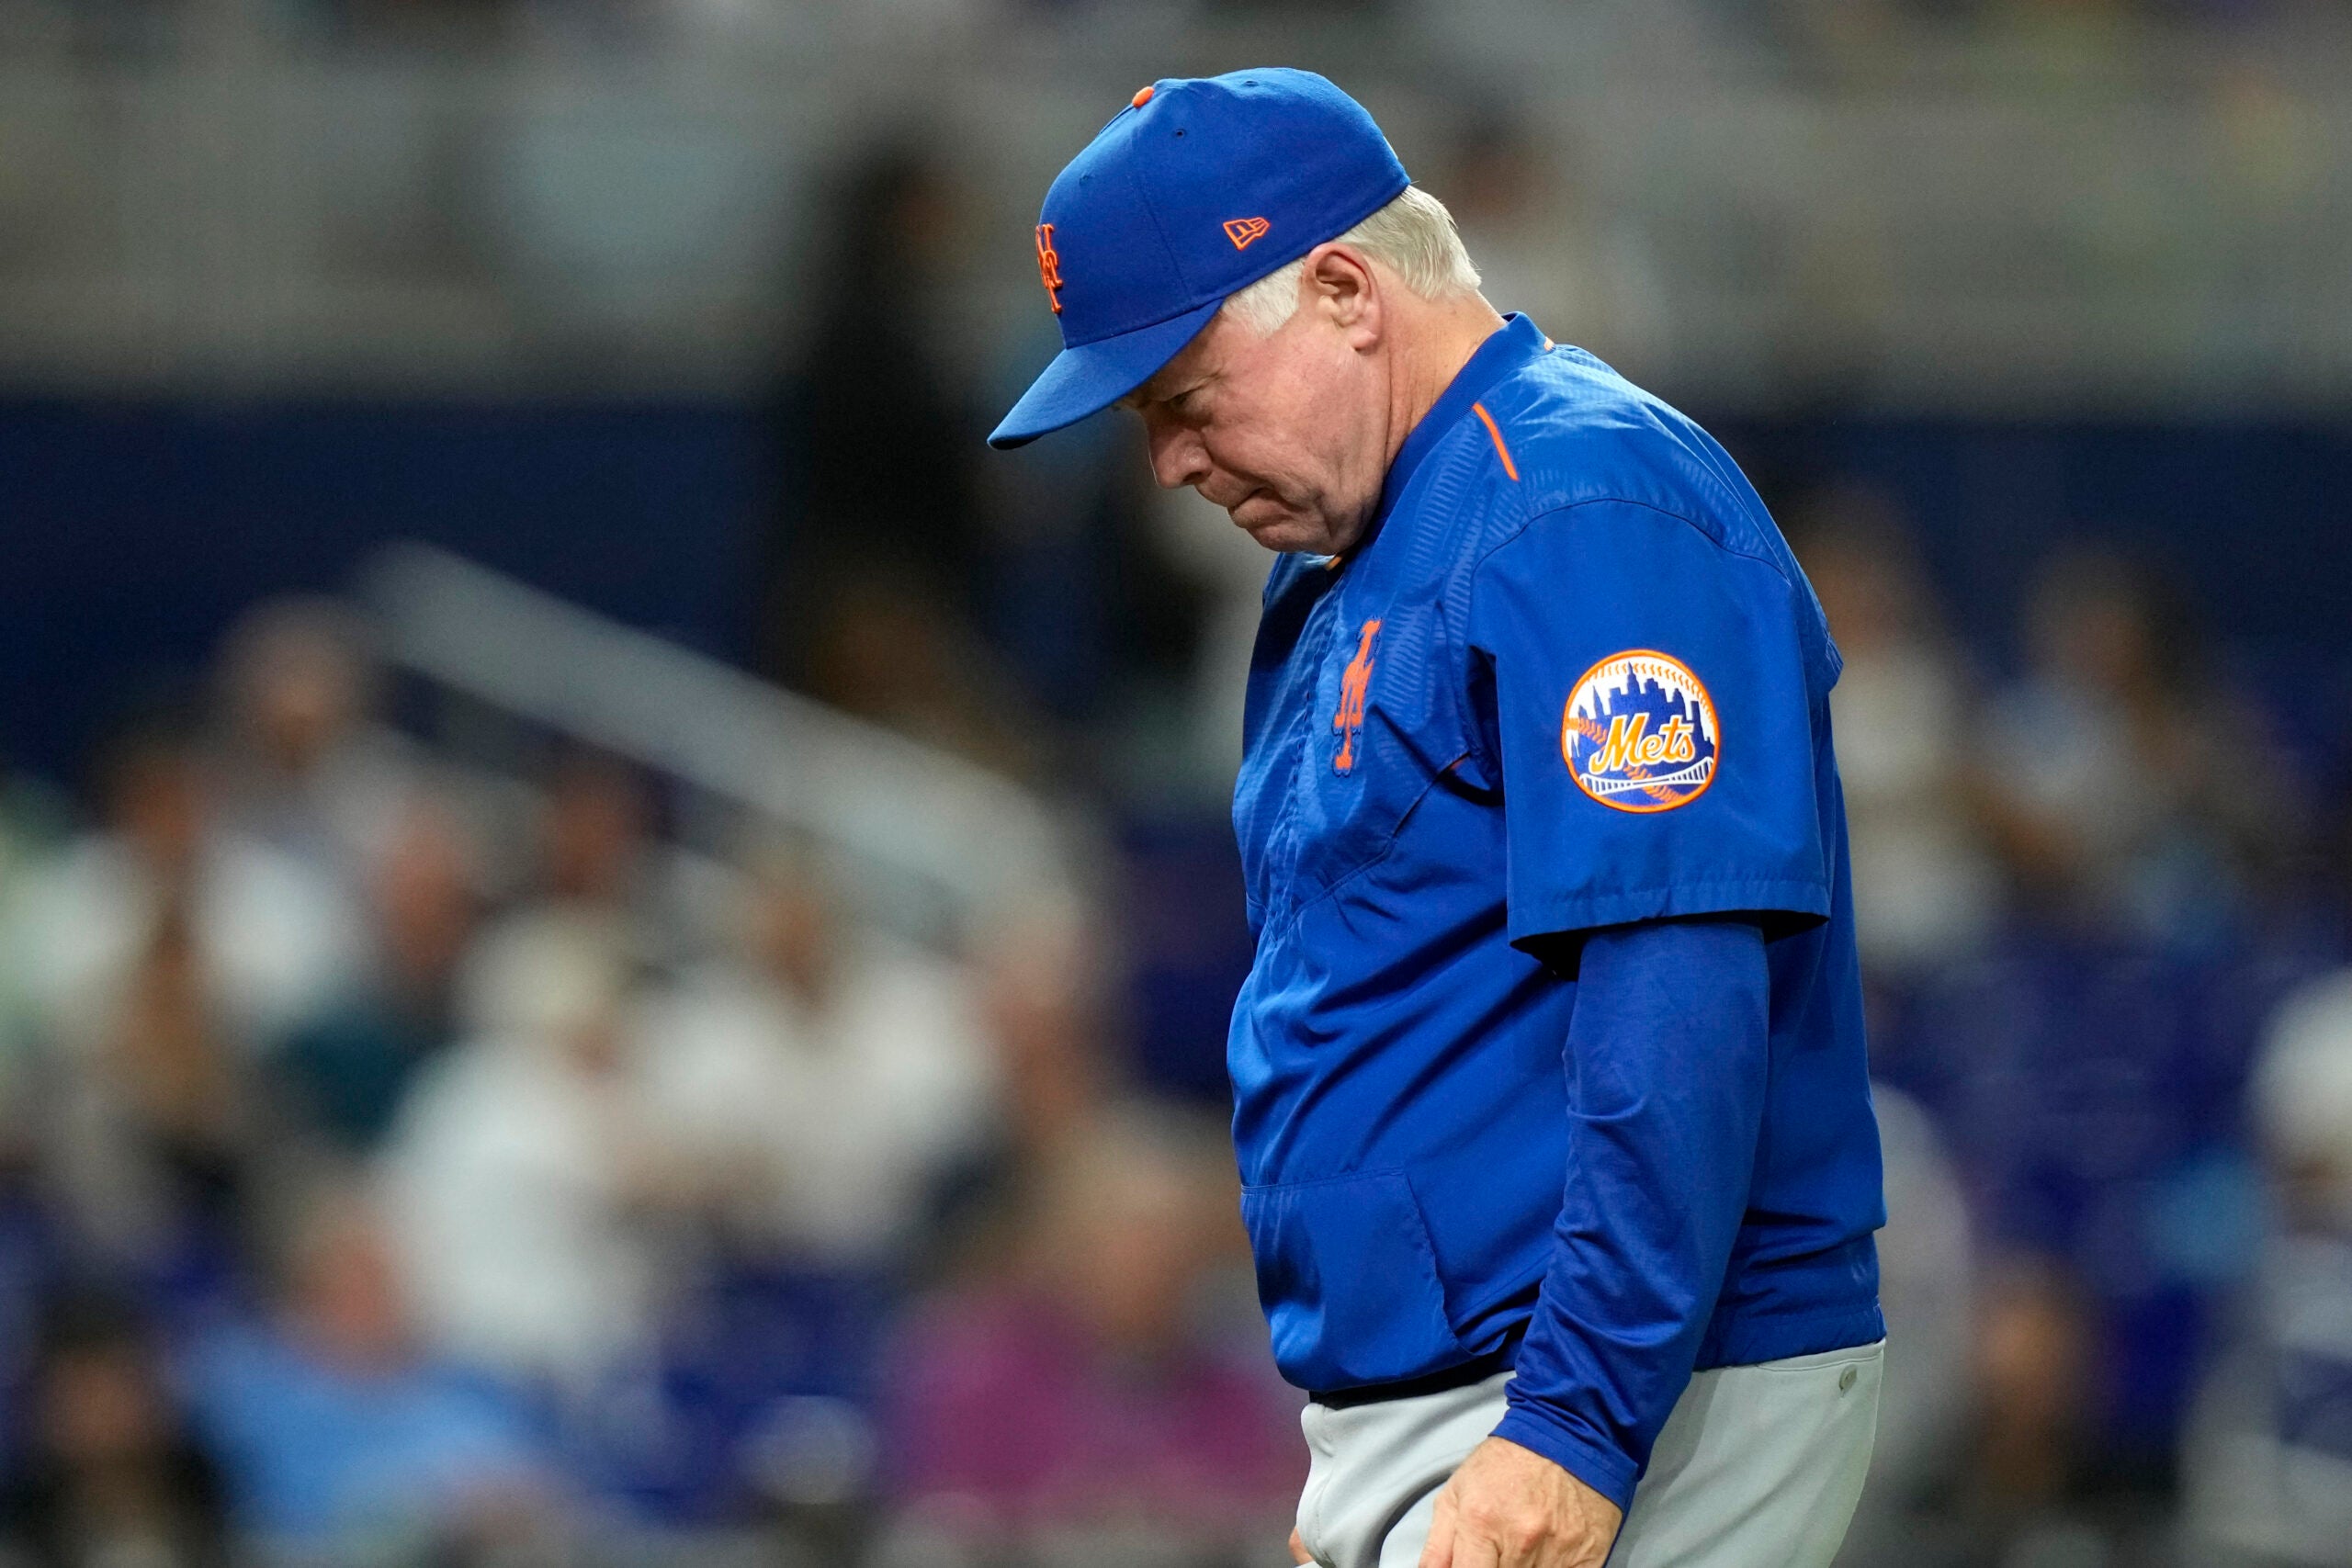 New York Mets manager Buck Showalter walks from the mound.